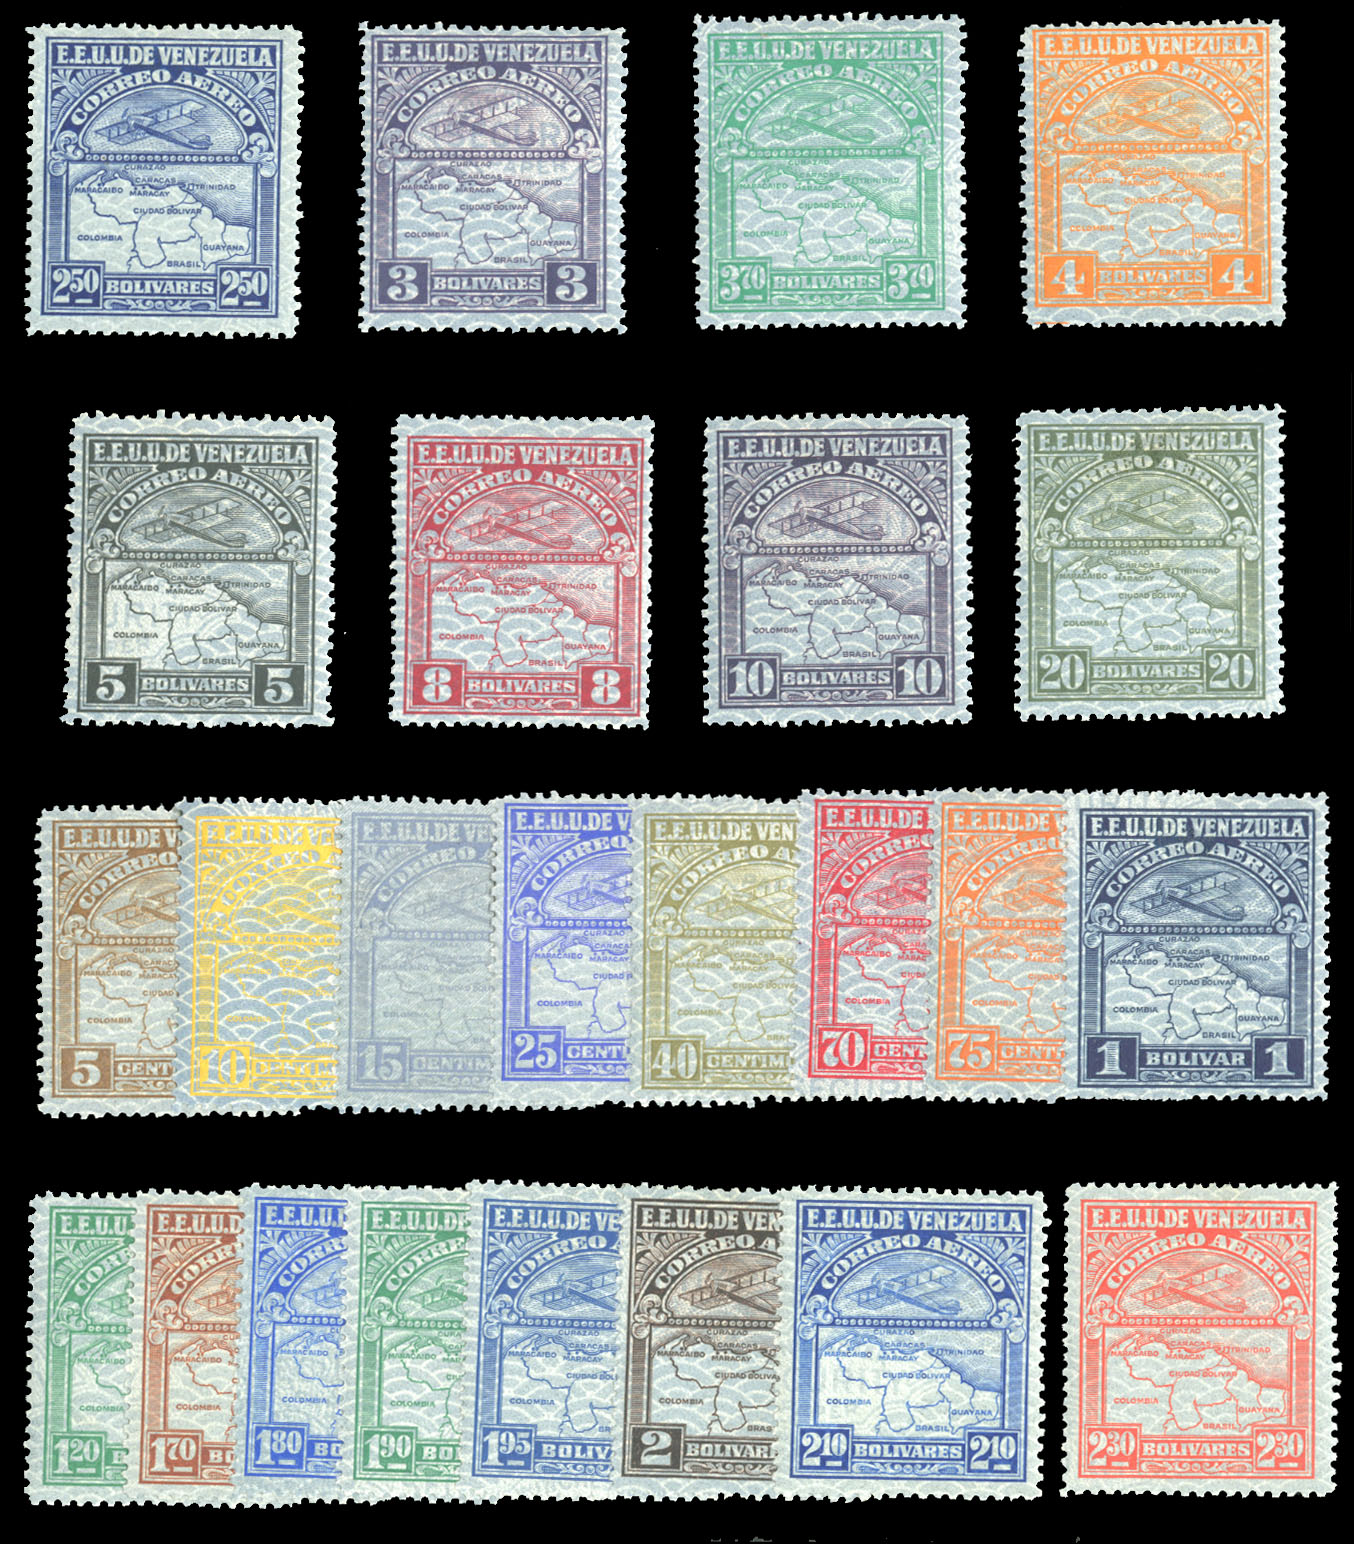 Lot 1373 - LARGE LOTS AND COLLECTIONS BRITISH COMMONWEALTH - Omnibus sets  -  Cherrystone Auctions U.S. & Worldwide Stamps & Postal History